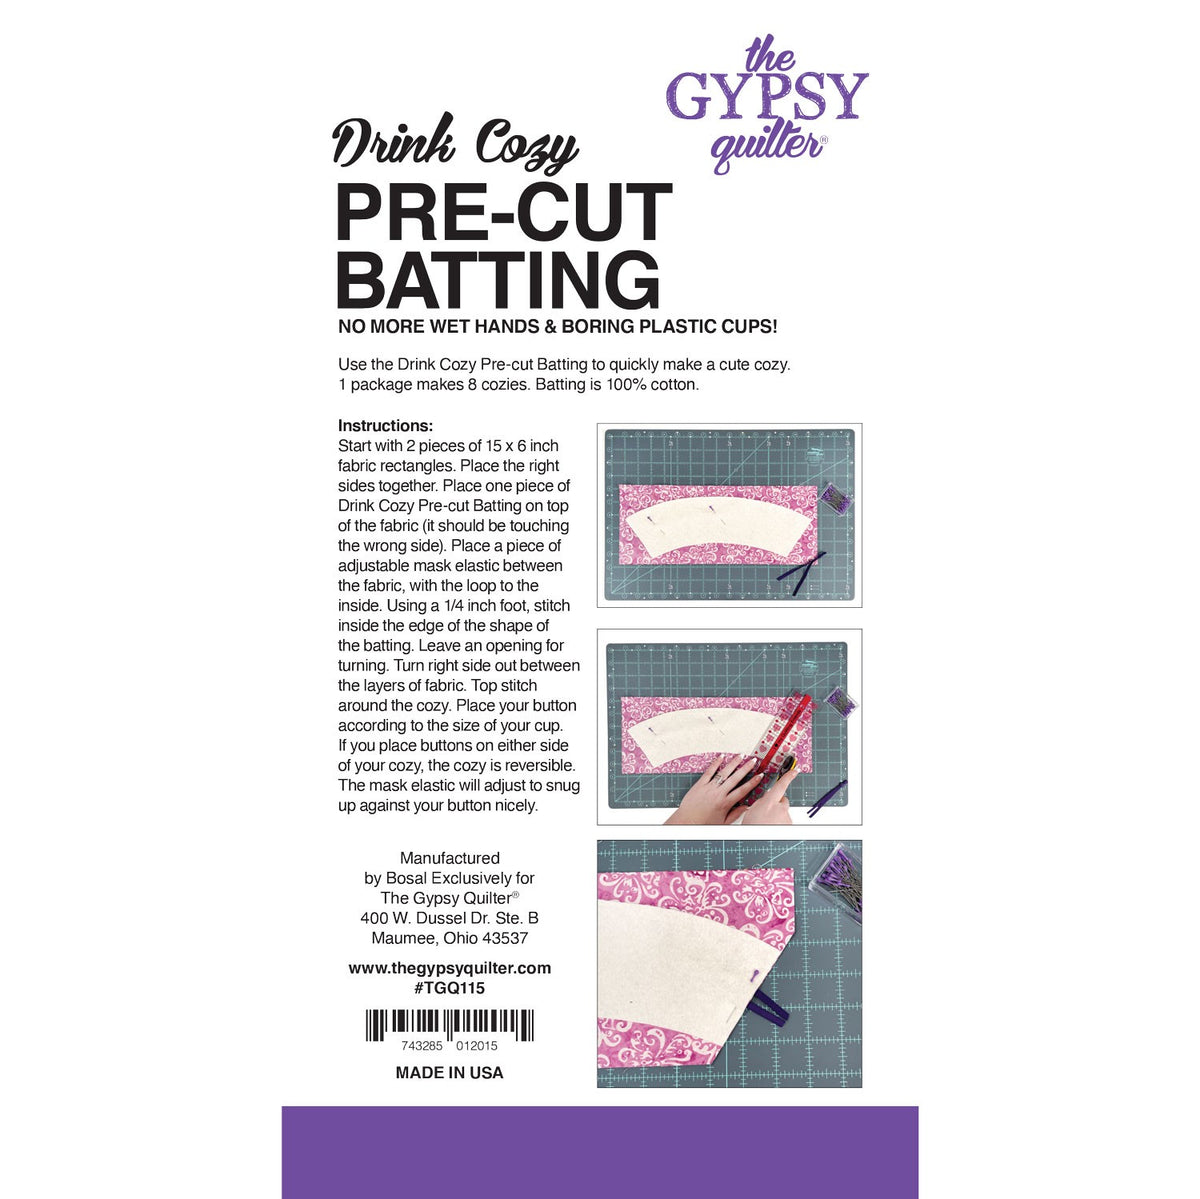 DRINK Cozy Precut Batting by The Gypsy Quilter – The Singer